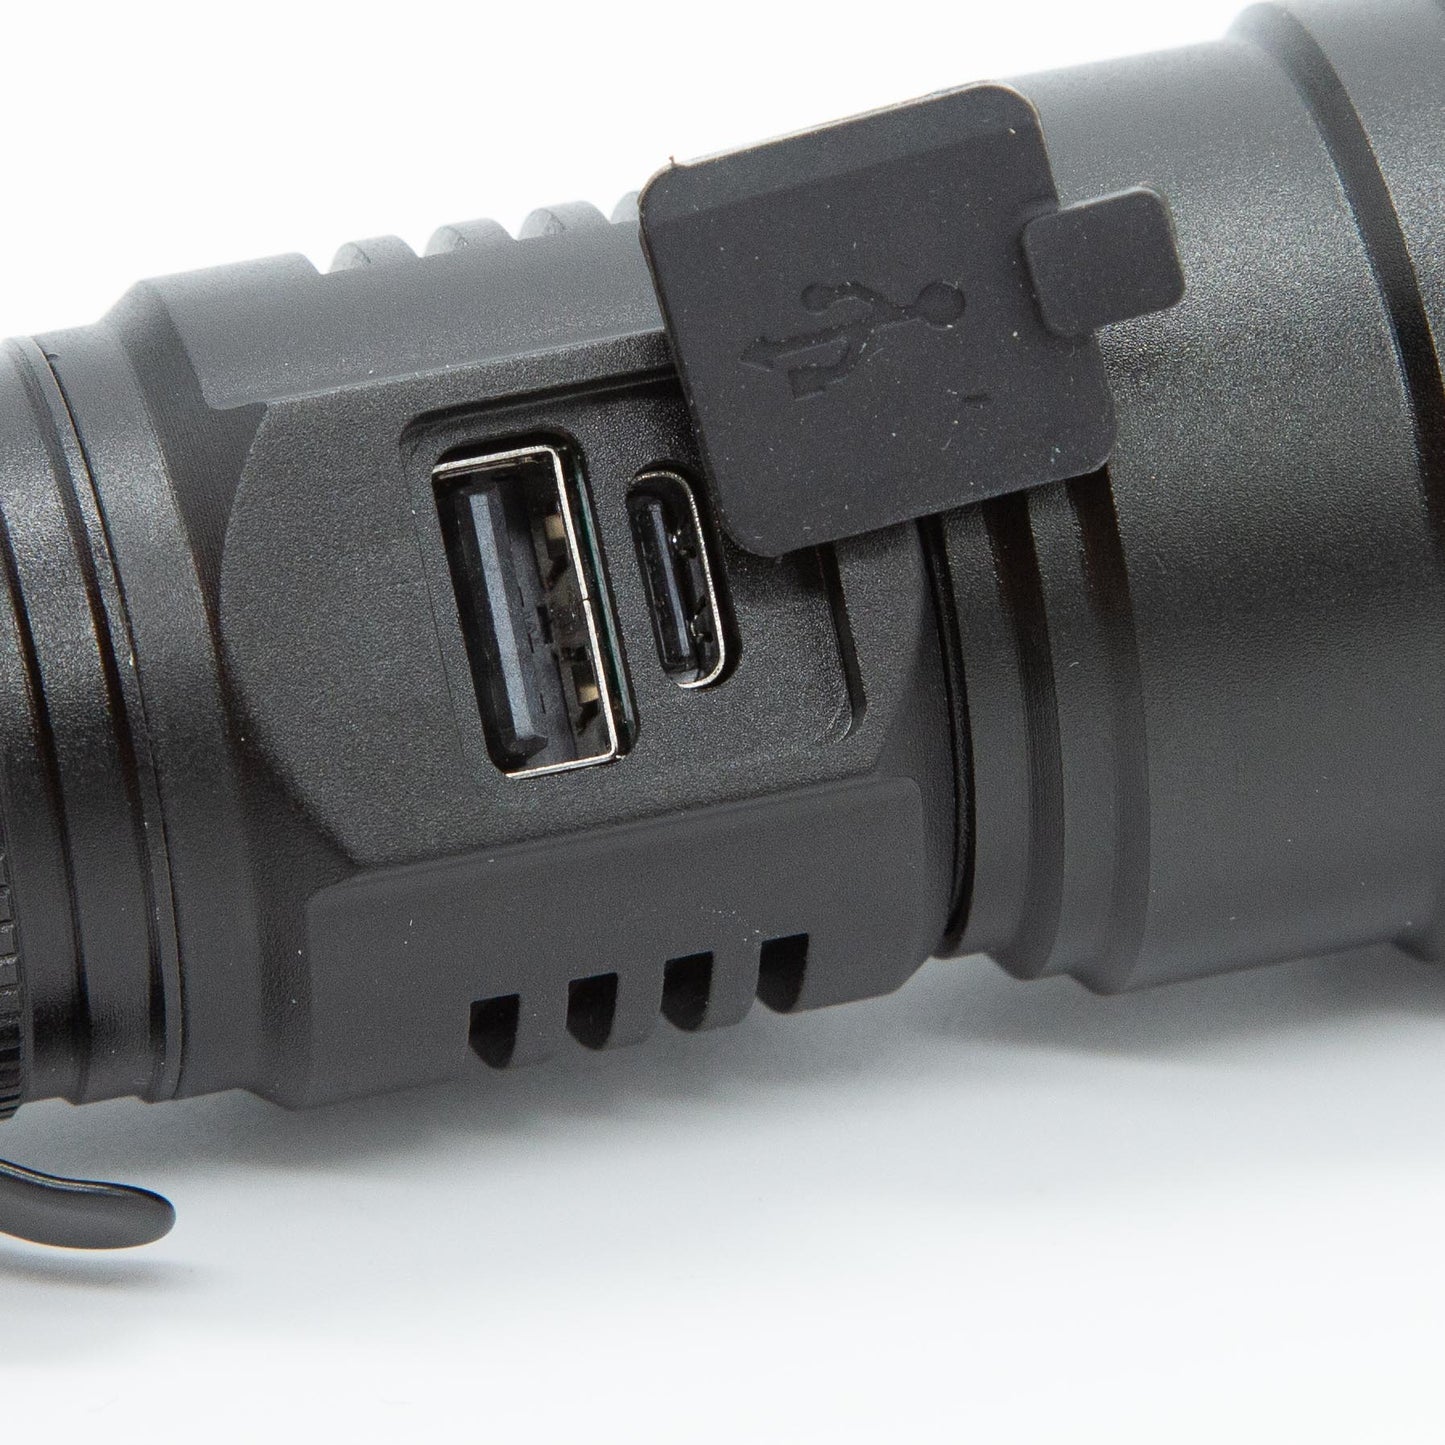 XHP90 Powerful Rechargeable Torch (including 26650 Battery) With Power Bank & 5 Light Modes & Clip